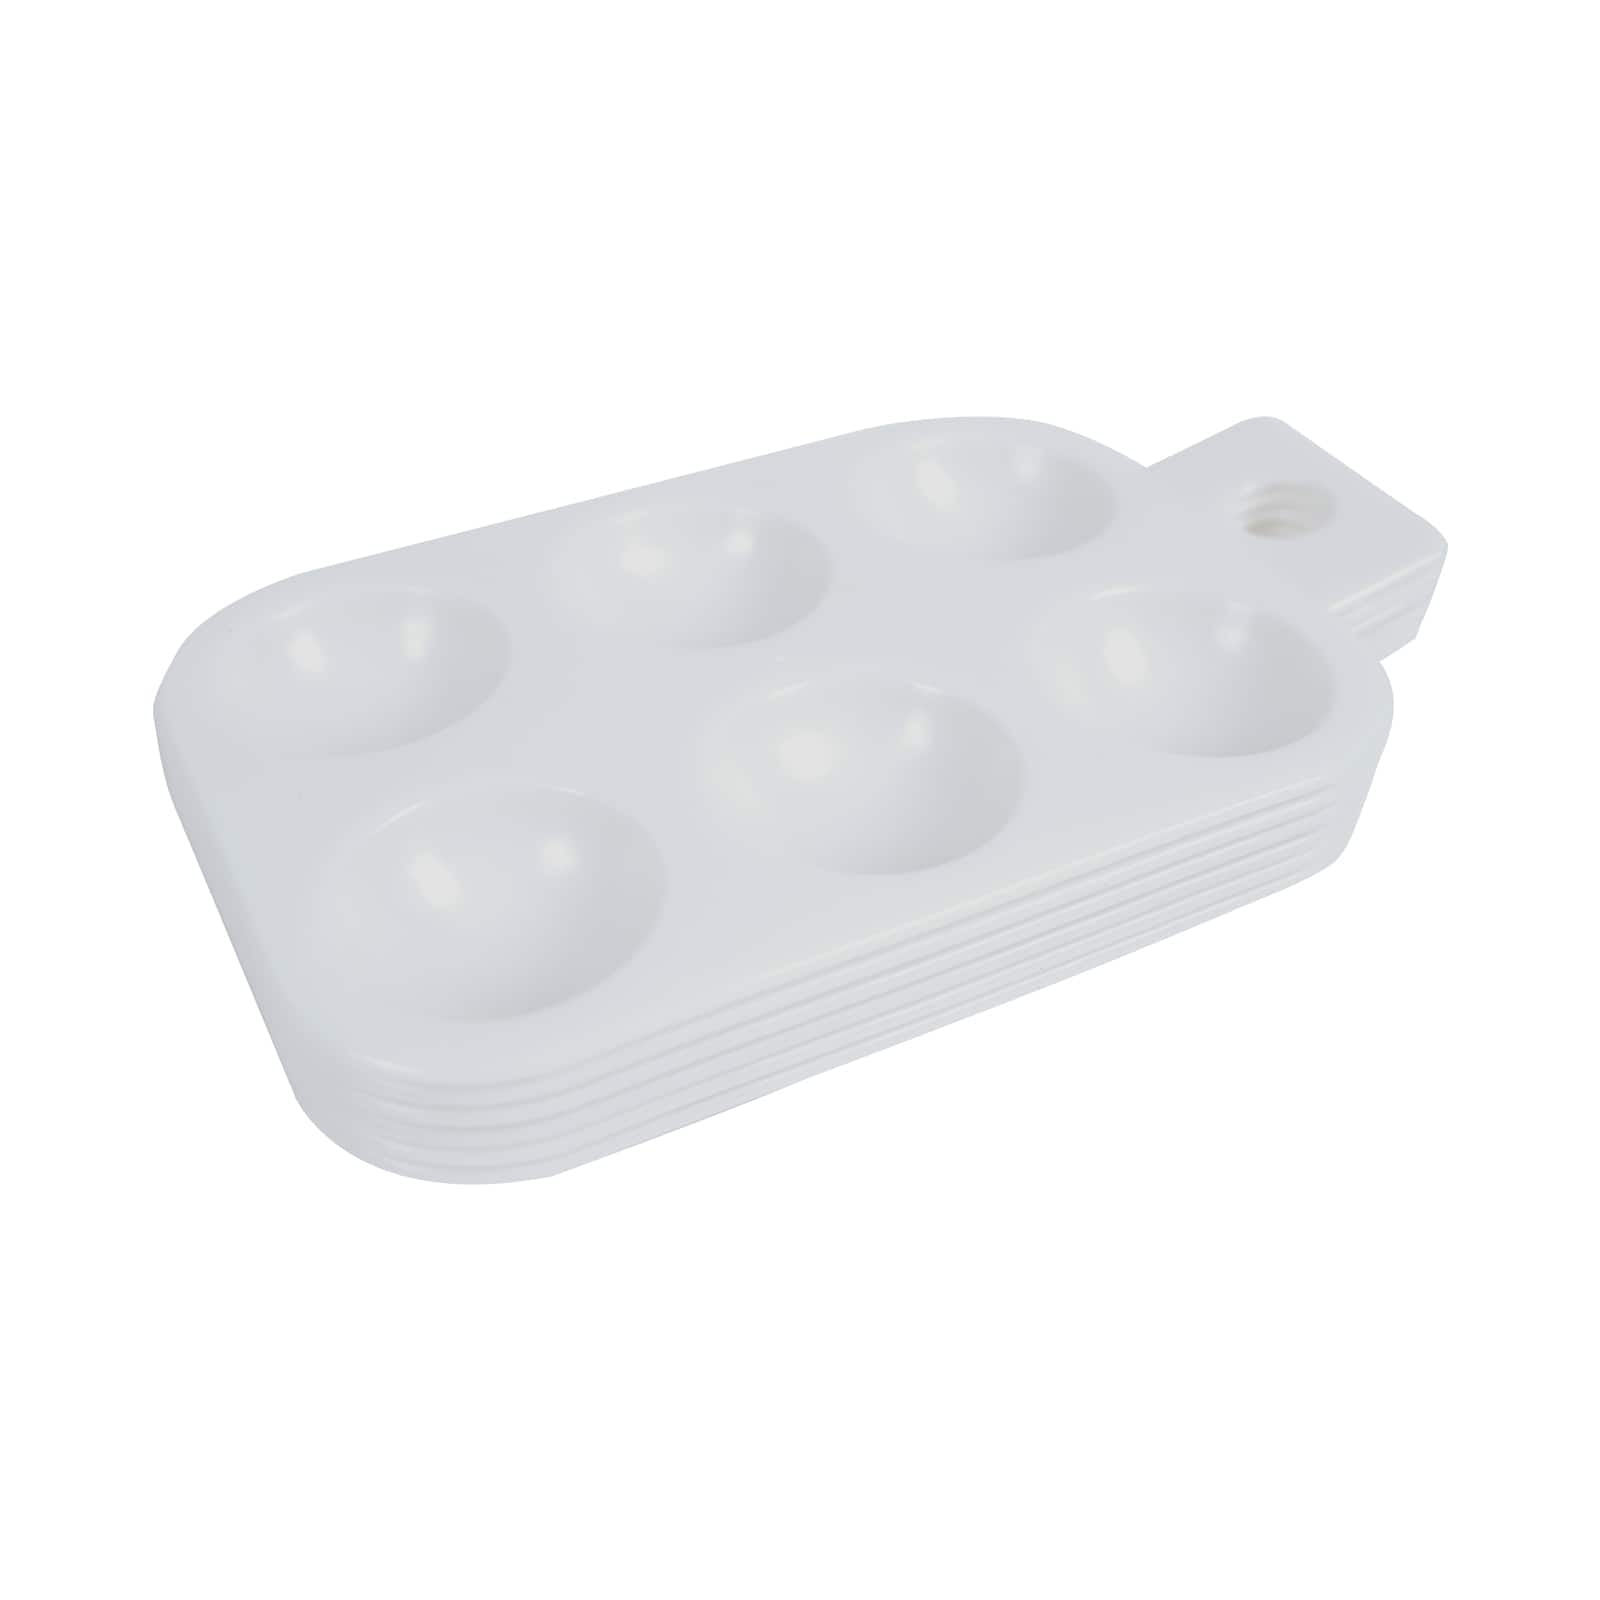 6 Pack: 6-Well Plastic Palette by Craft Smart&#xAE;